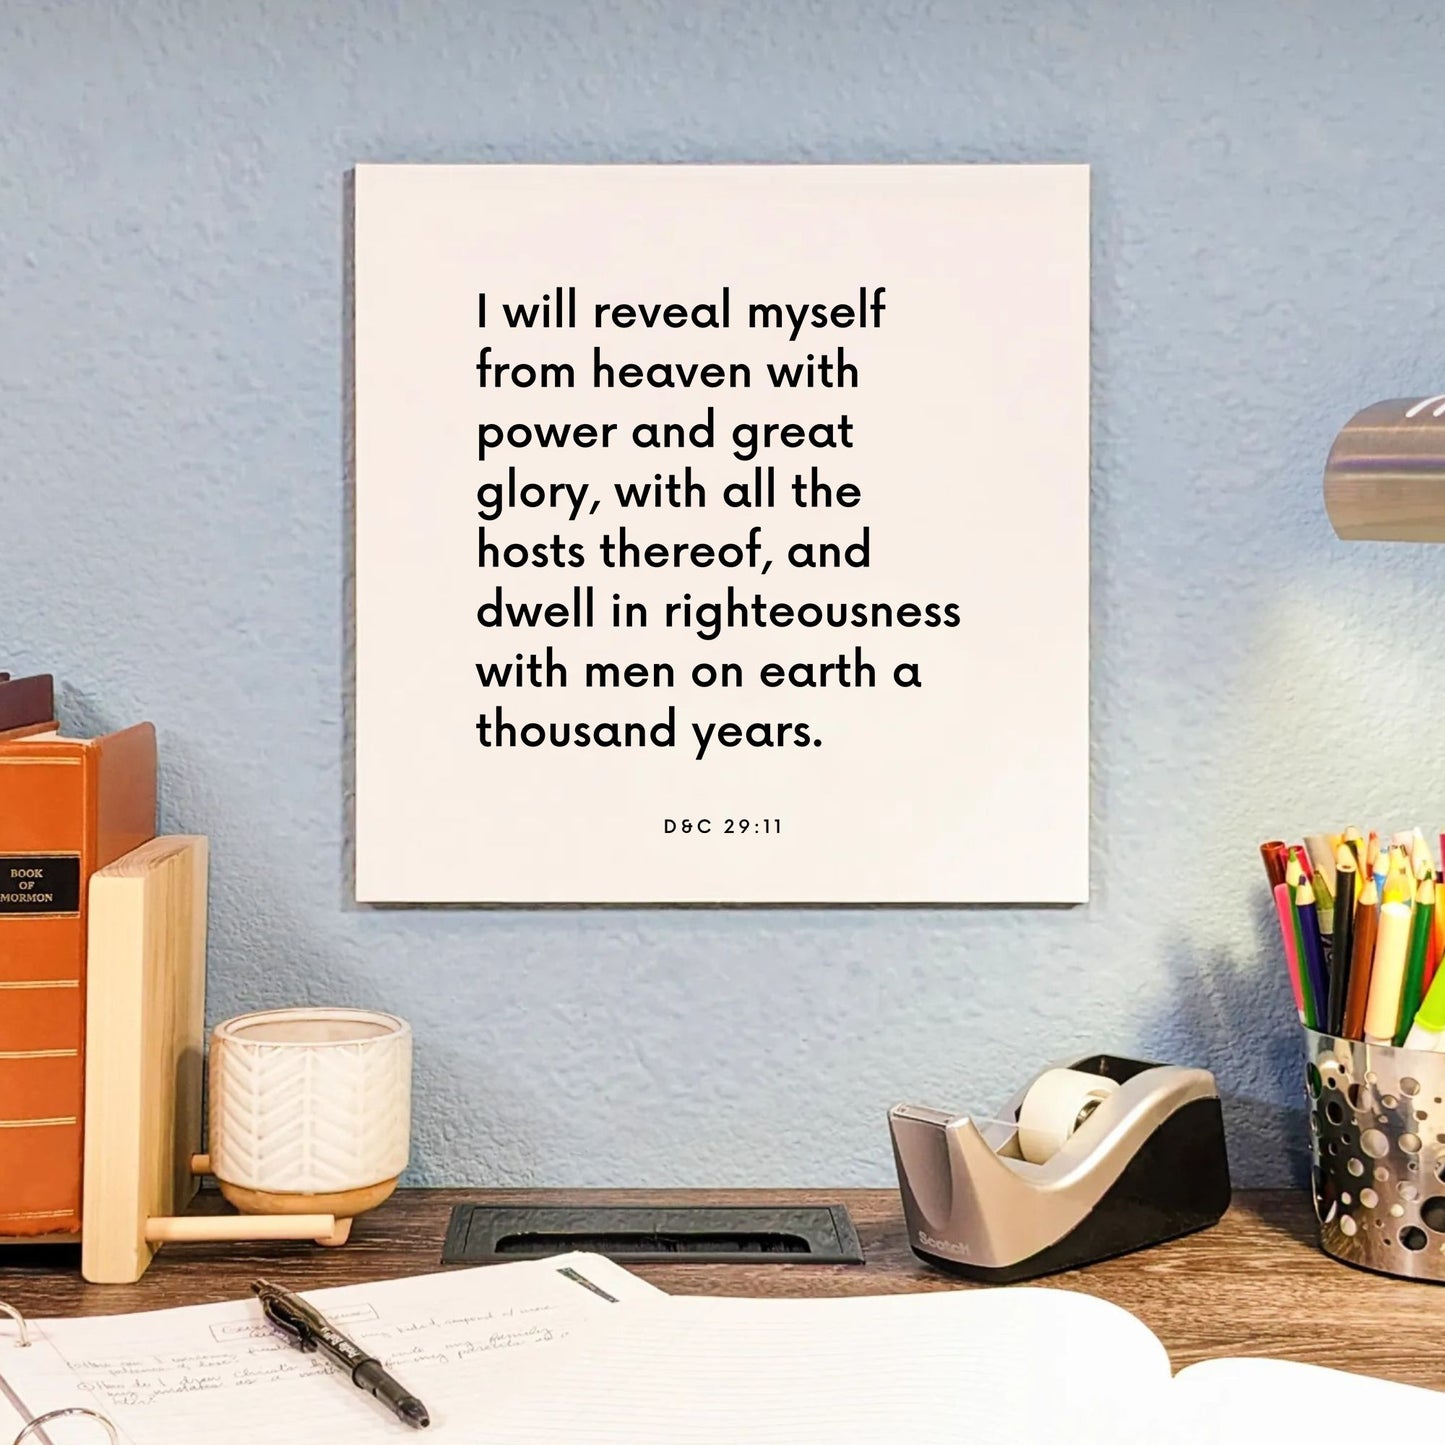 Desk mouting of the scripture tile for D&C 29:11 - "I will reveal myself from heaven"